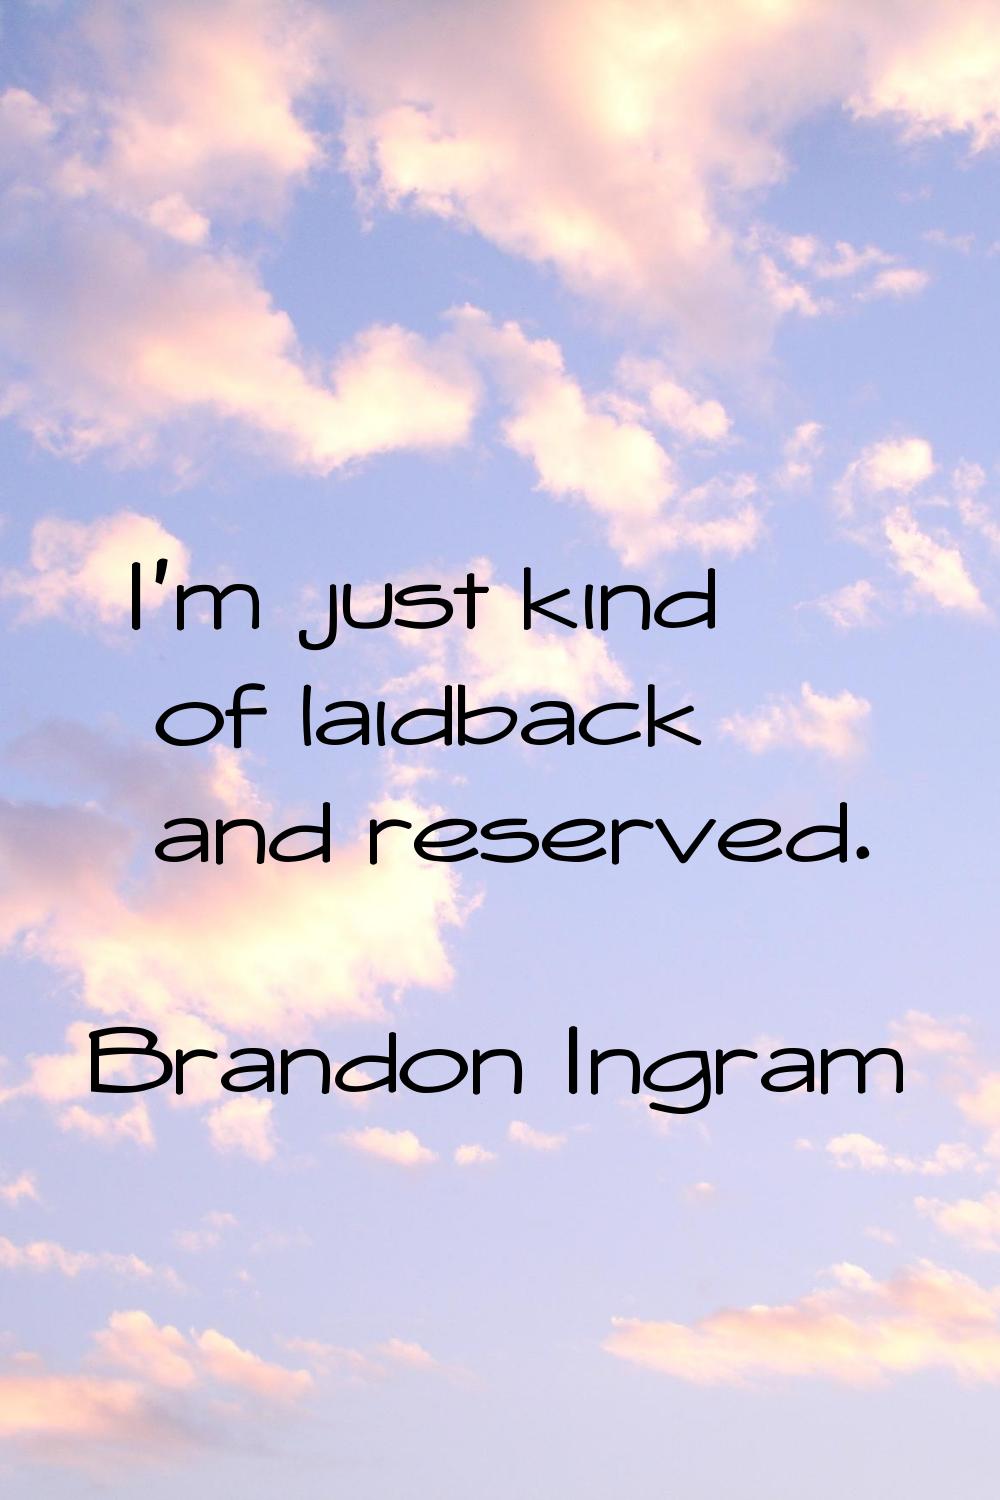 I'm just kind of laidback and reserved.